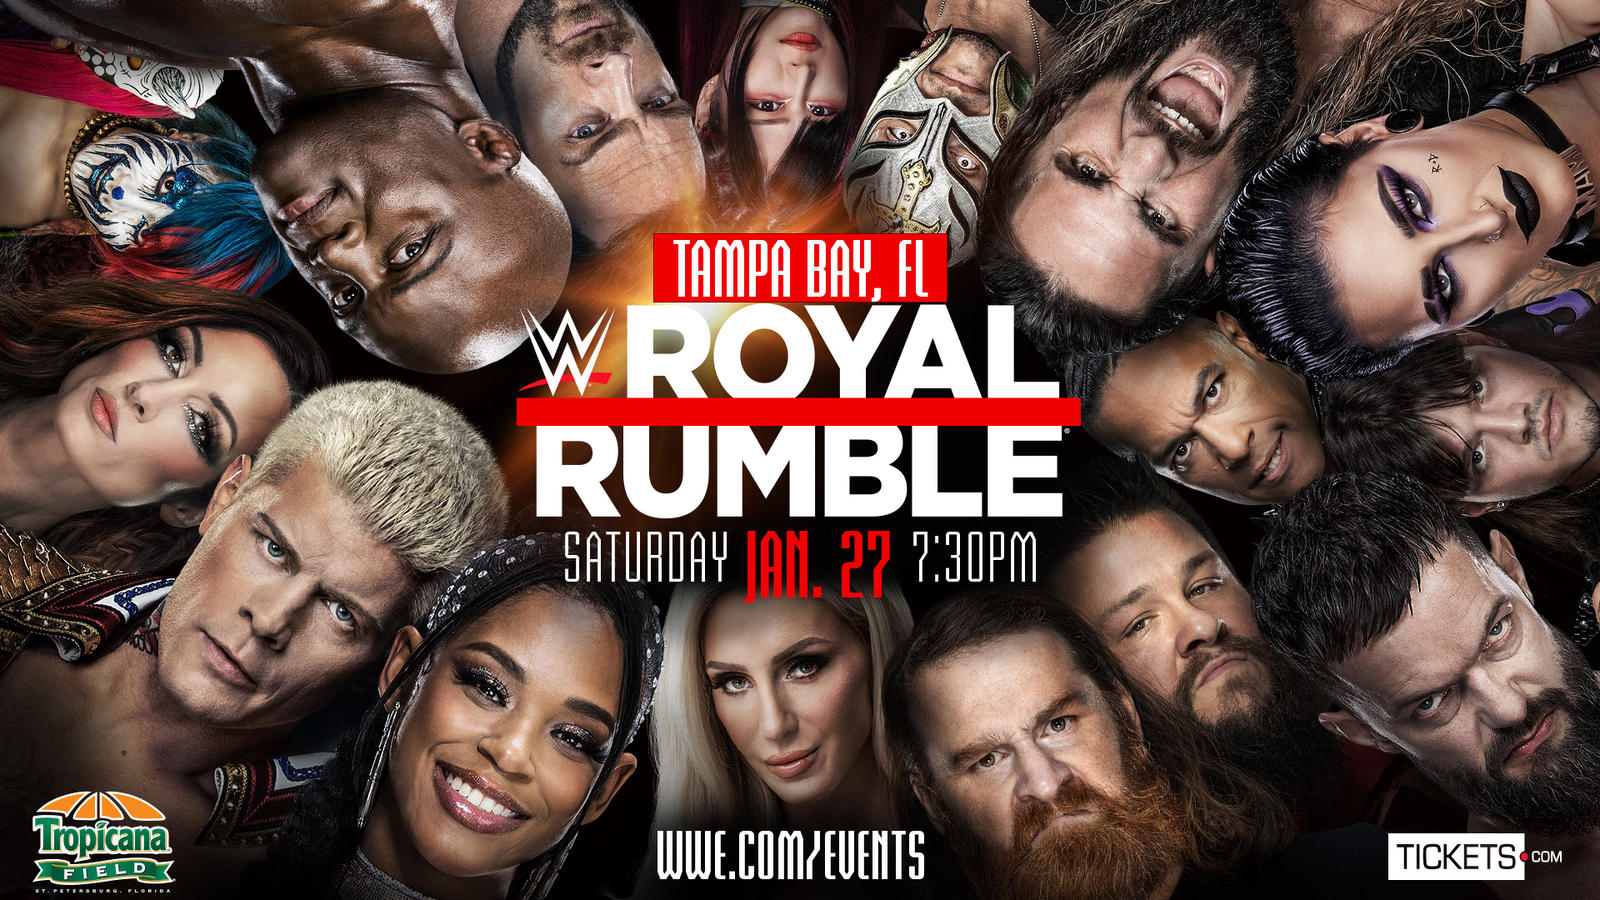 Spoiler on Two Potential Names for Women's Royal Rumble Wrestling